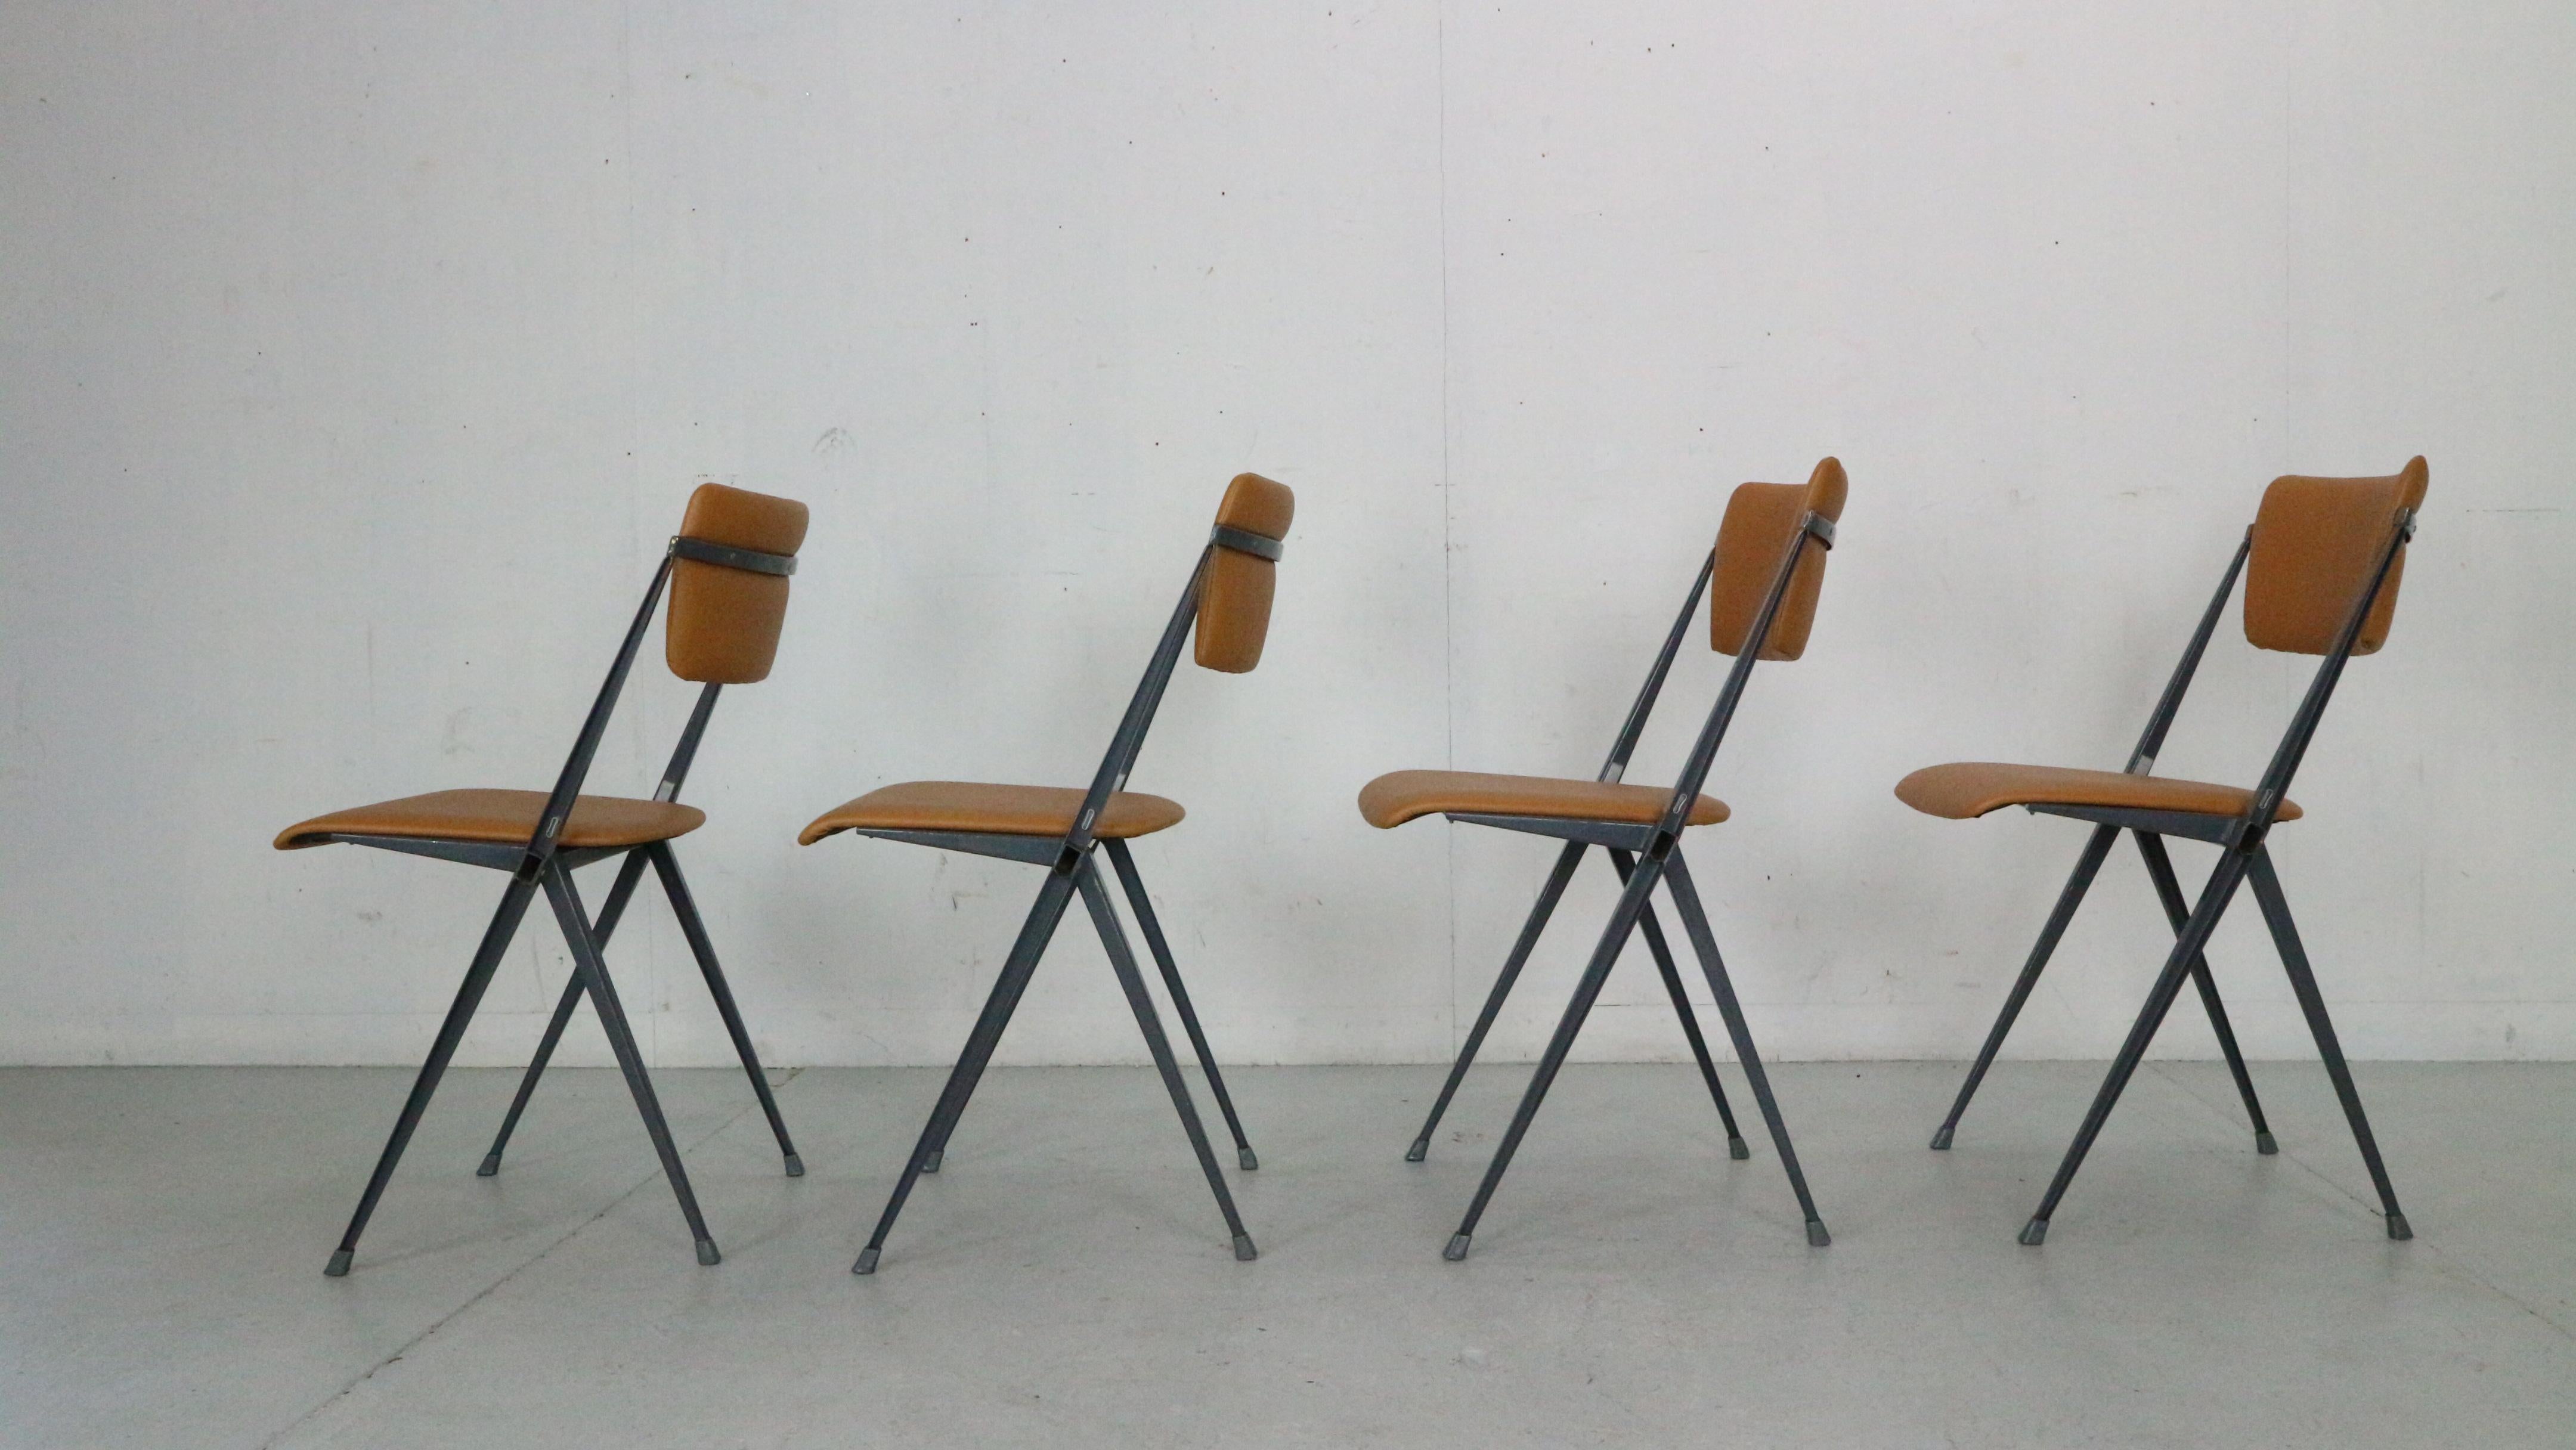 Faux Leather Wim Rietveld Set Of 4 Pyramide Chairs For De Cirkel, 1966 Netherlands For Sale